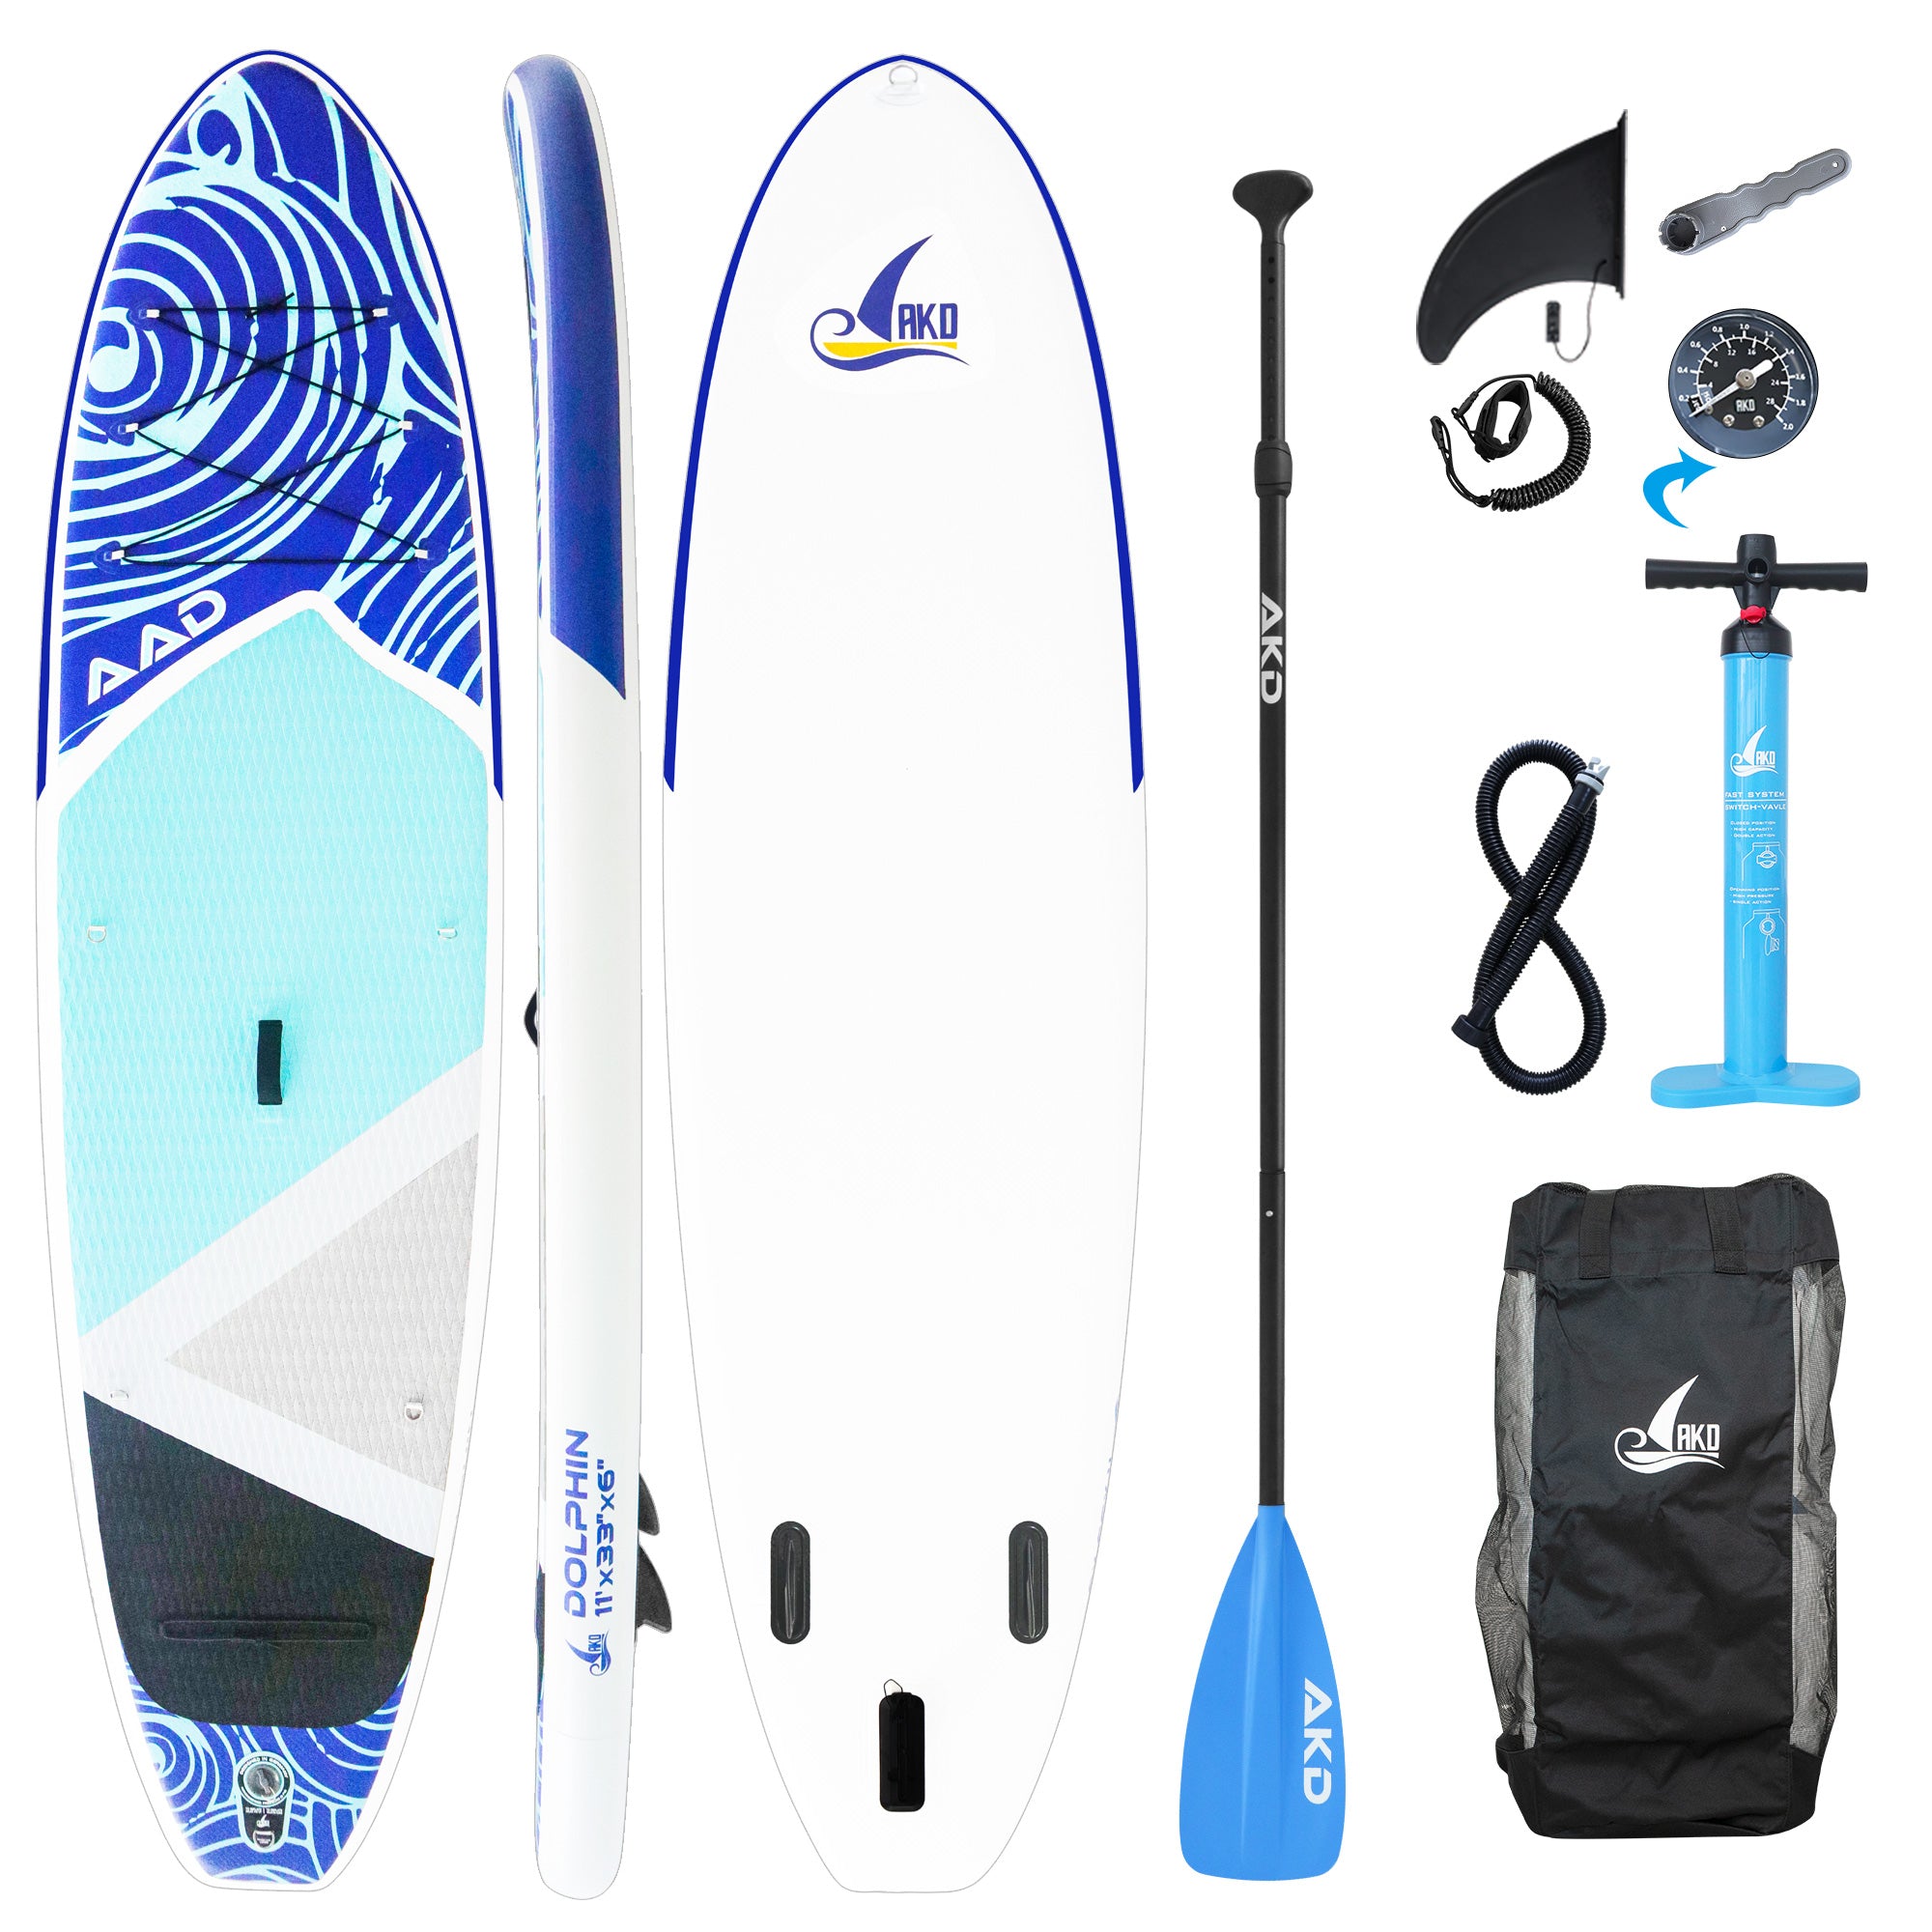 AKD Dolphin 11' Stand Up Paddle Board SUP 335x83x15cm 170kg / 346L (Bleu)